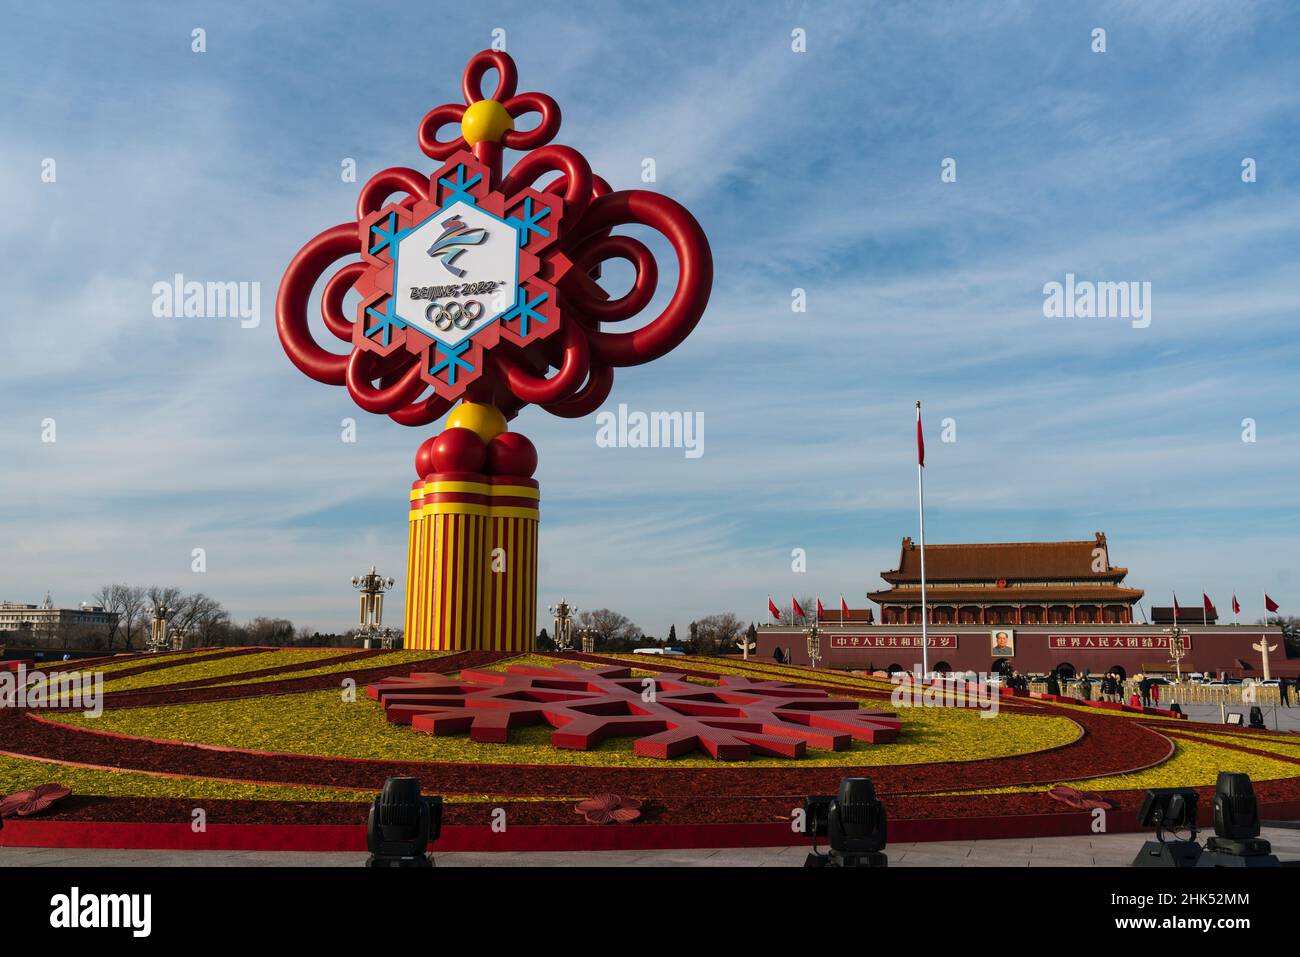 Beijing, China - January 28, 2022: Chinese knot, Decorative stand promoting the Beijing Winter Olympics Games 2022 on Tian'anmen Square, Beijing Stock Photo